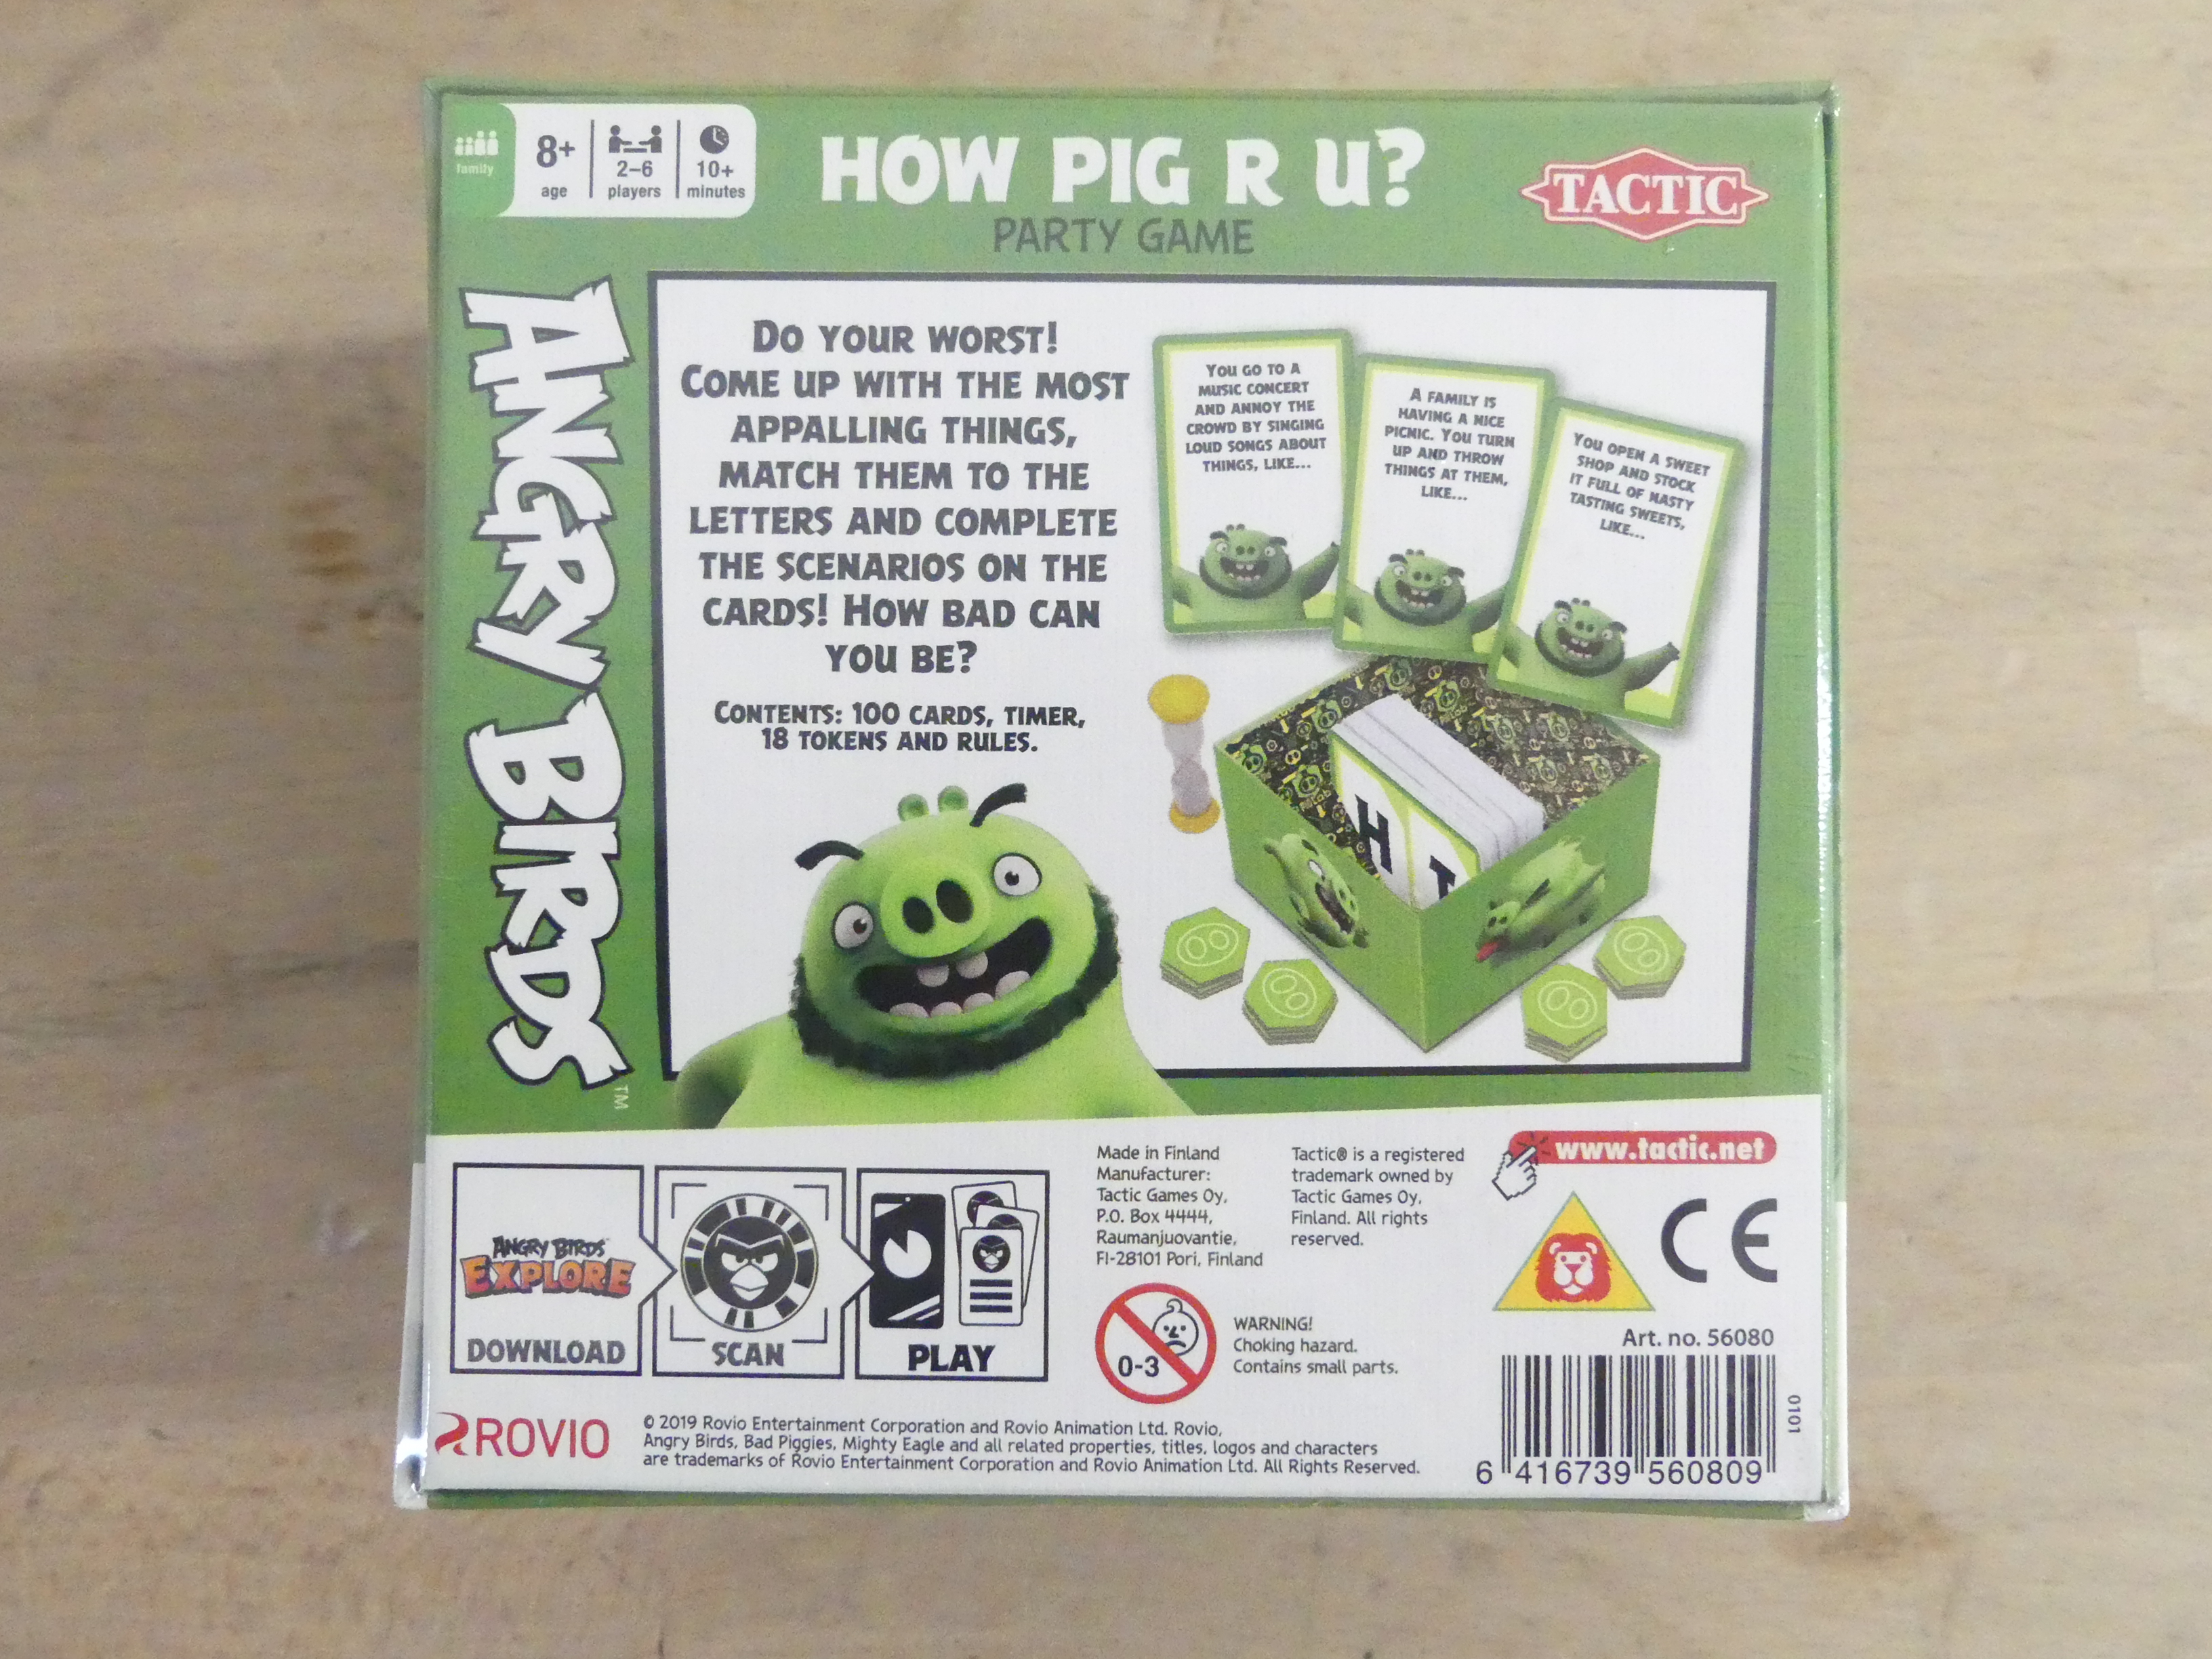 Angry Birds Party Game "How Pig are U" 